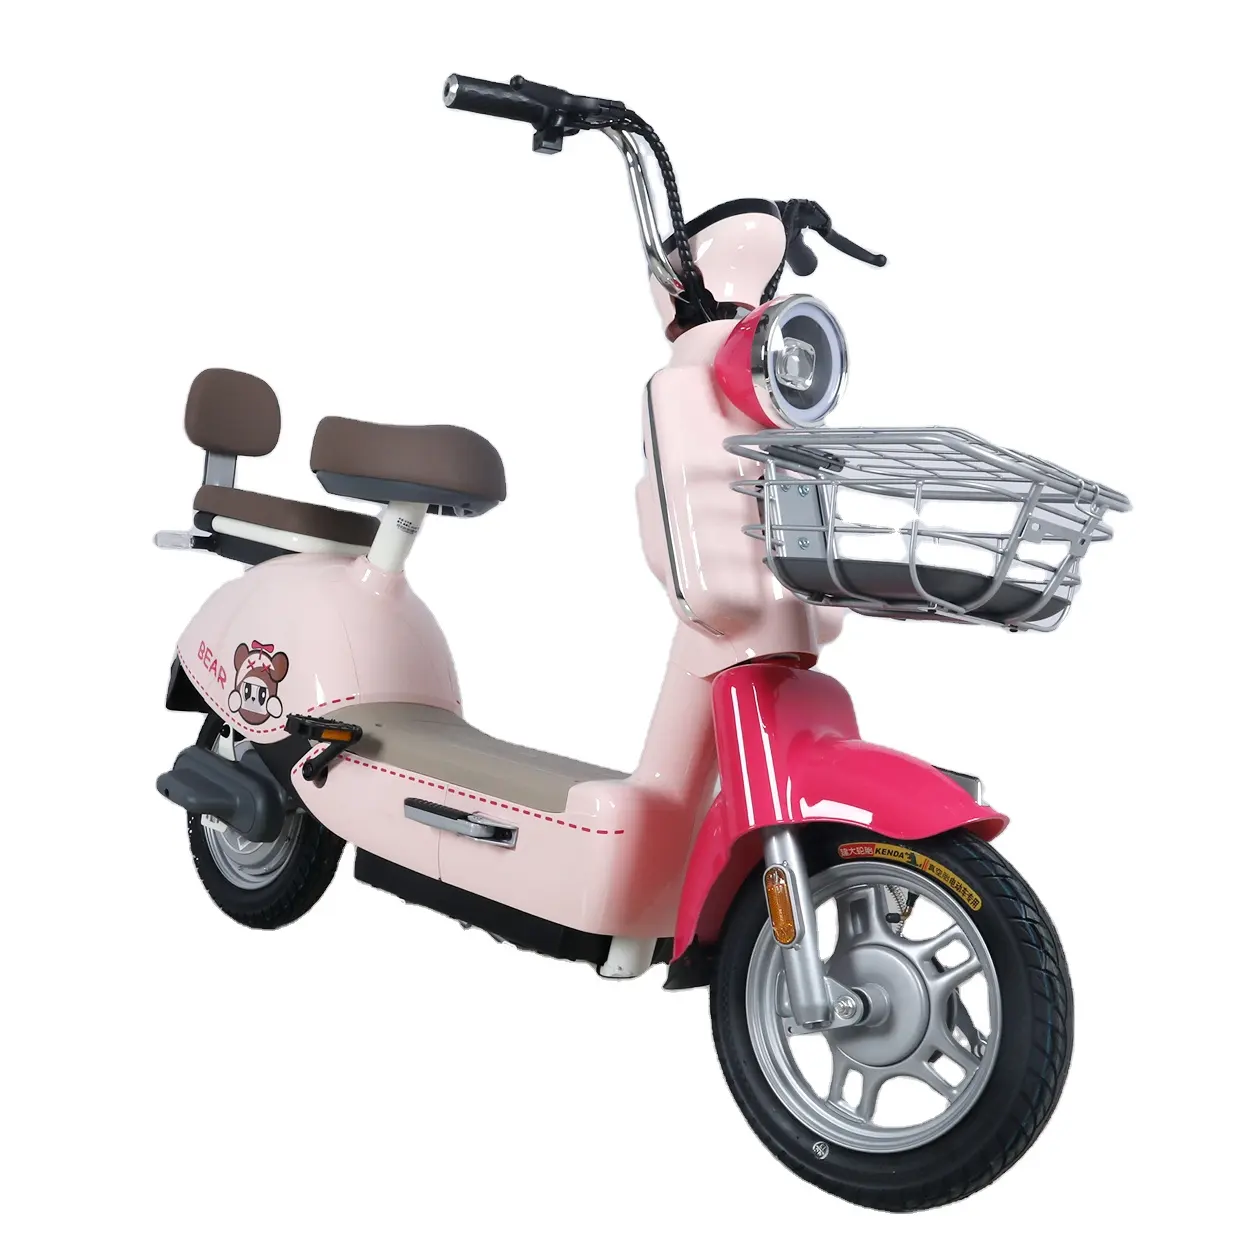 Lady pink colour electric scooter 14 Inch 350W Long Range Electric Scooter Fast Off-Road Performance Cheap scooter bicycle